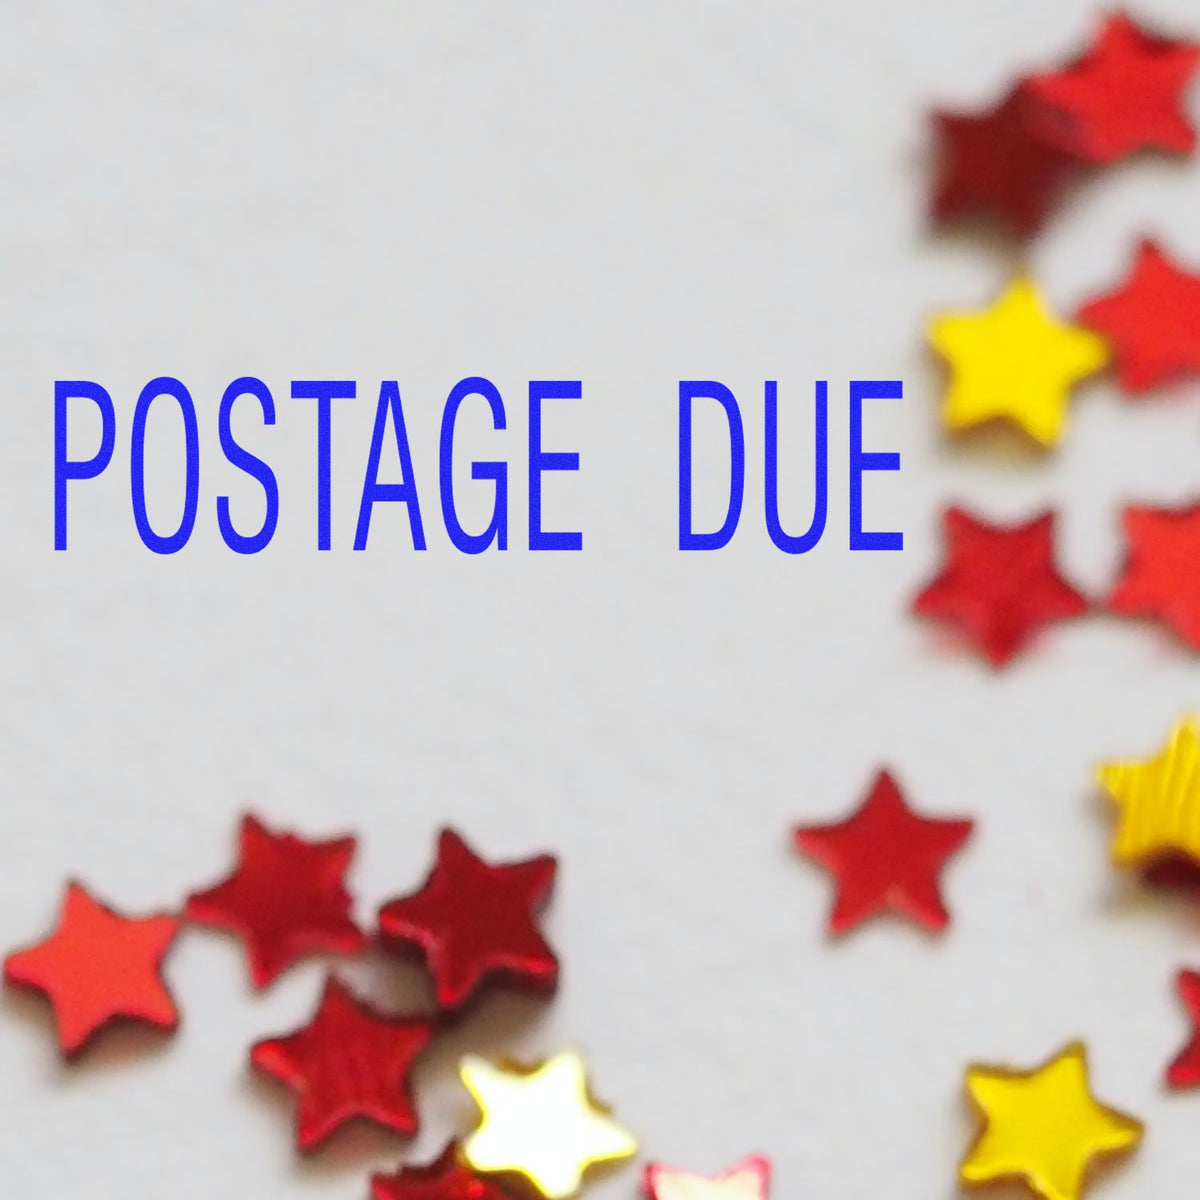 Large Postage Due Rubber Stamp In Use Photo